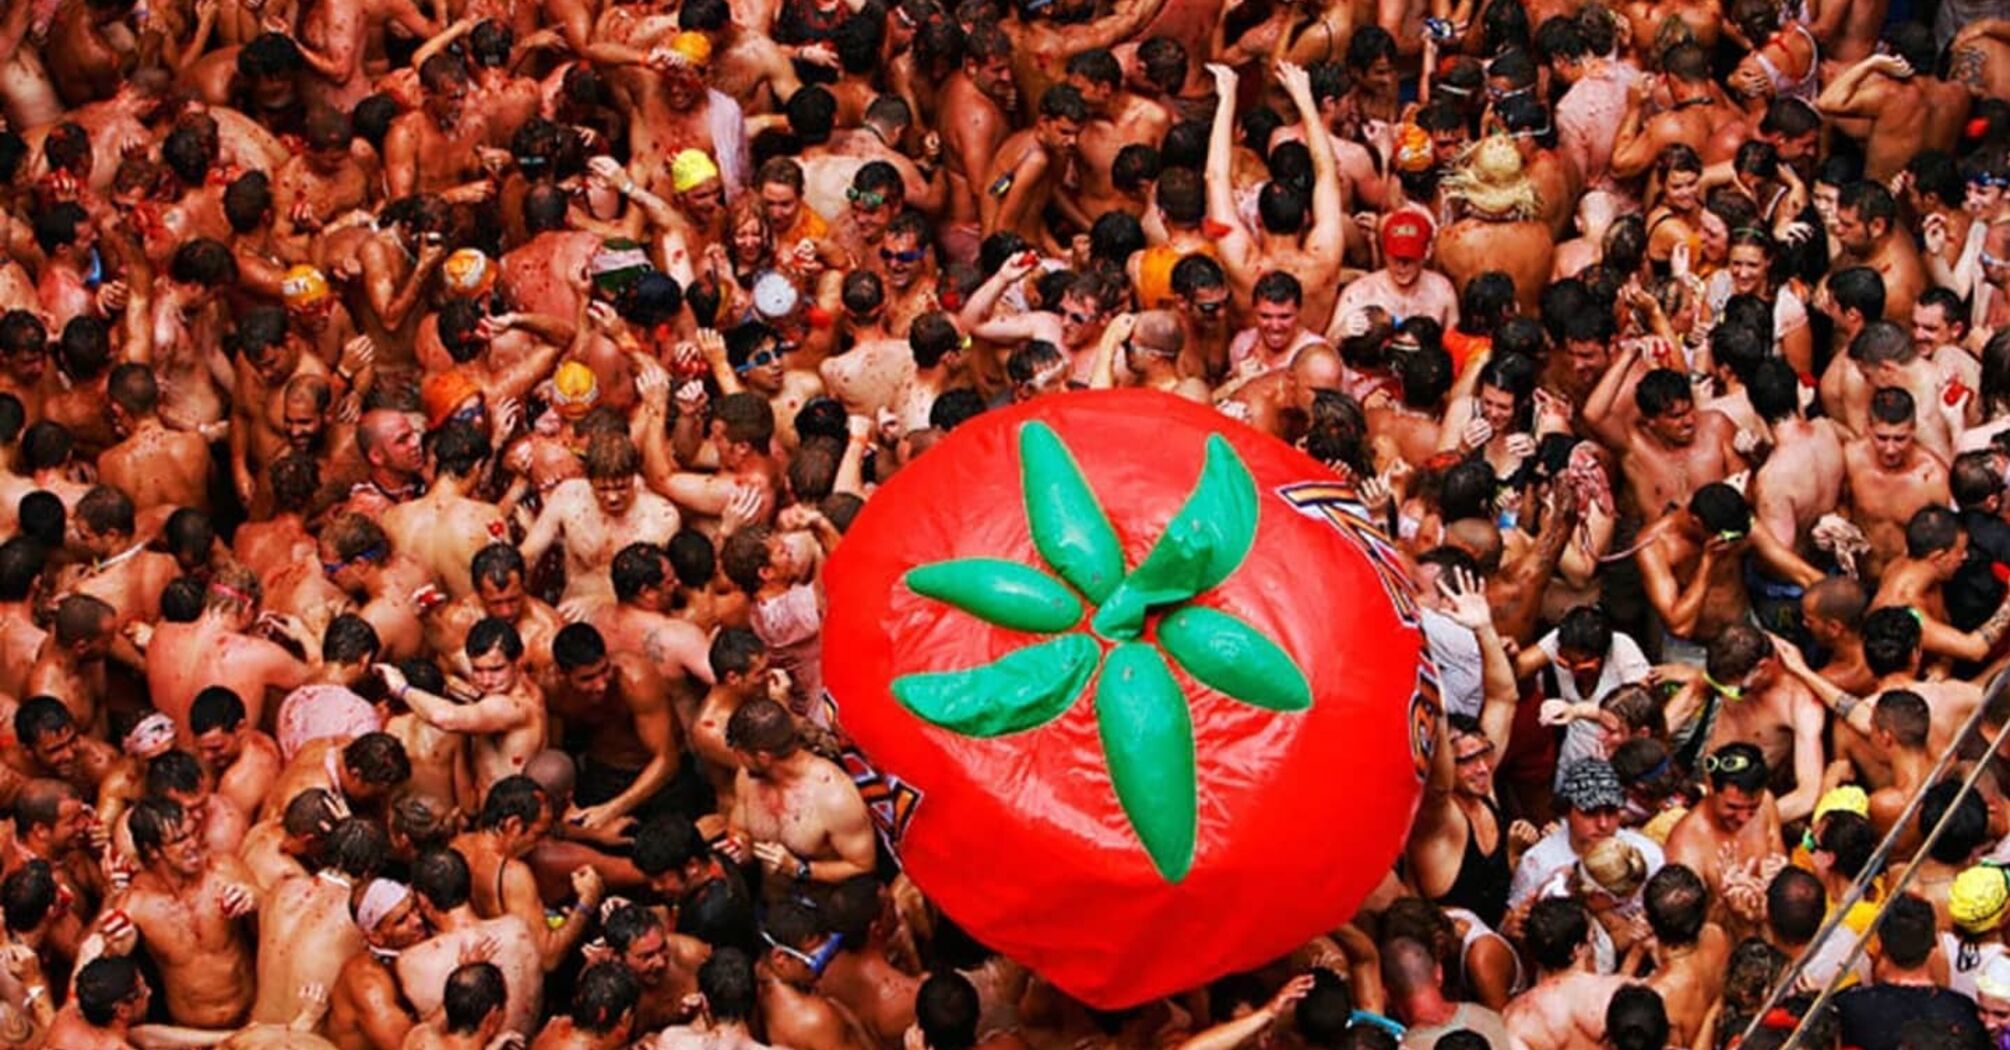 From the Tomato Festival to the Pumpkin Festival: tourists' favorite festivals